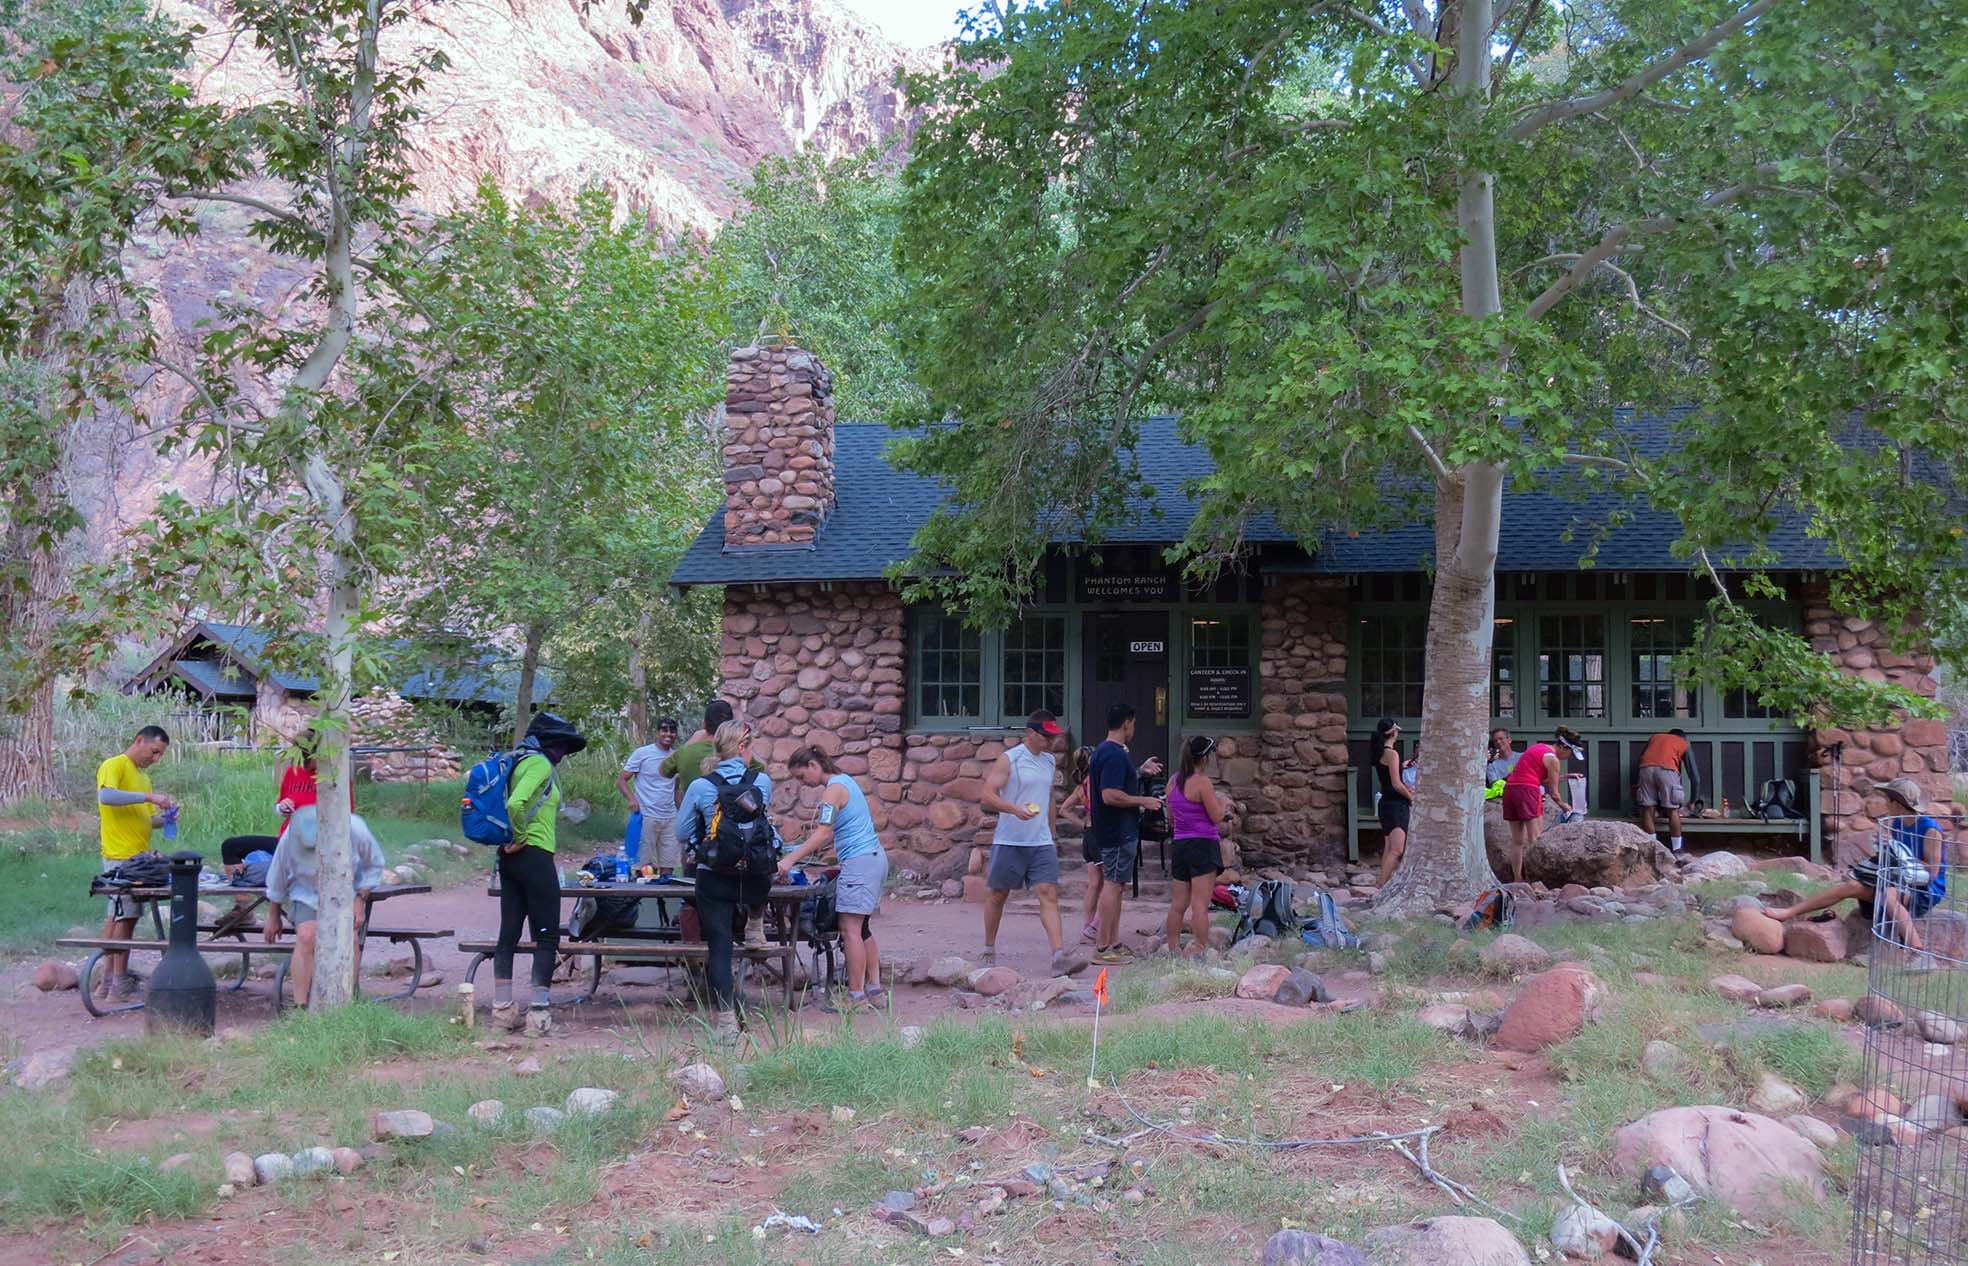 20 hikers and runners resting and organizing their gear in front of a rustic lodge built from river cobbles.